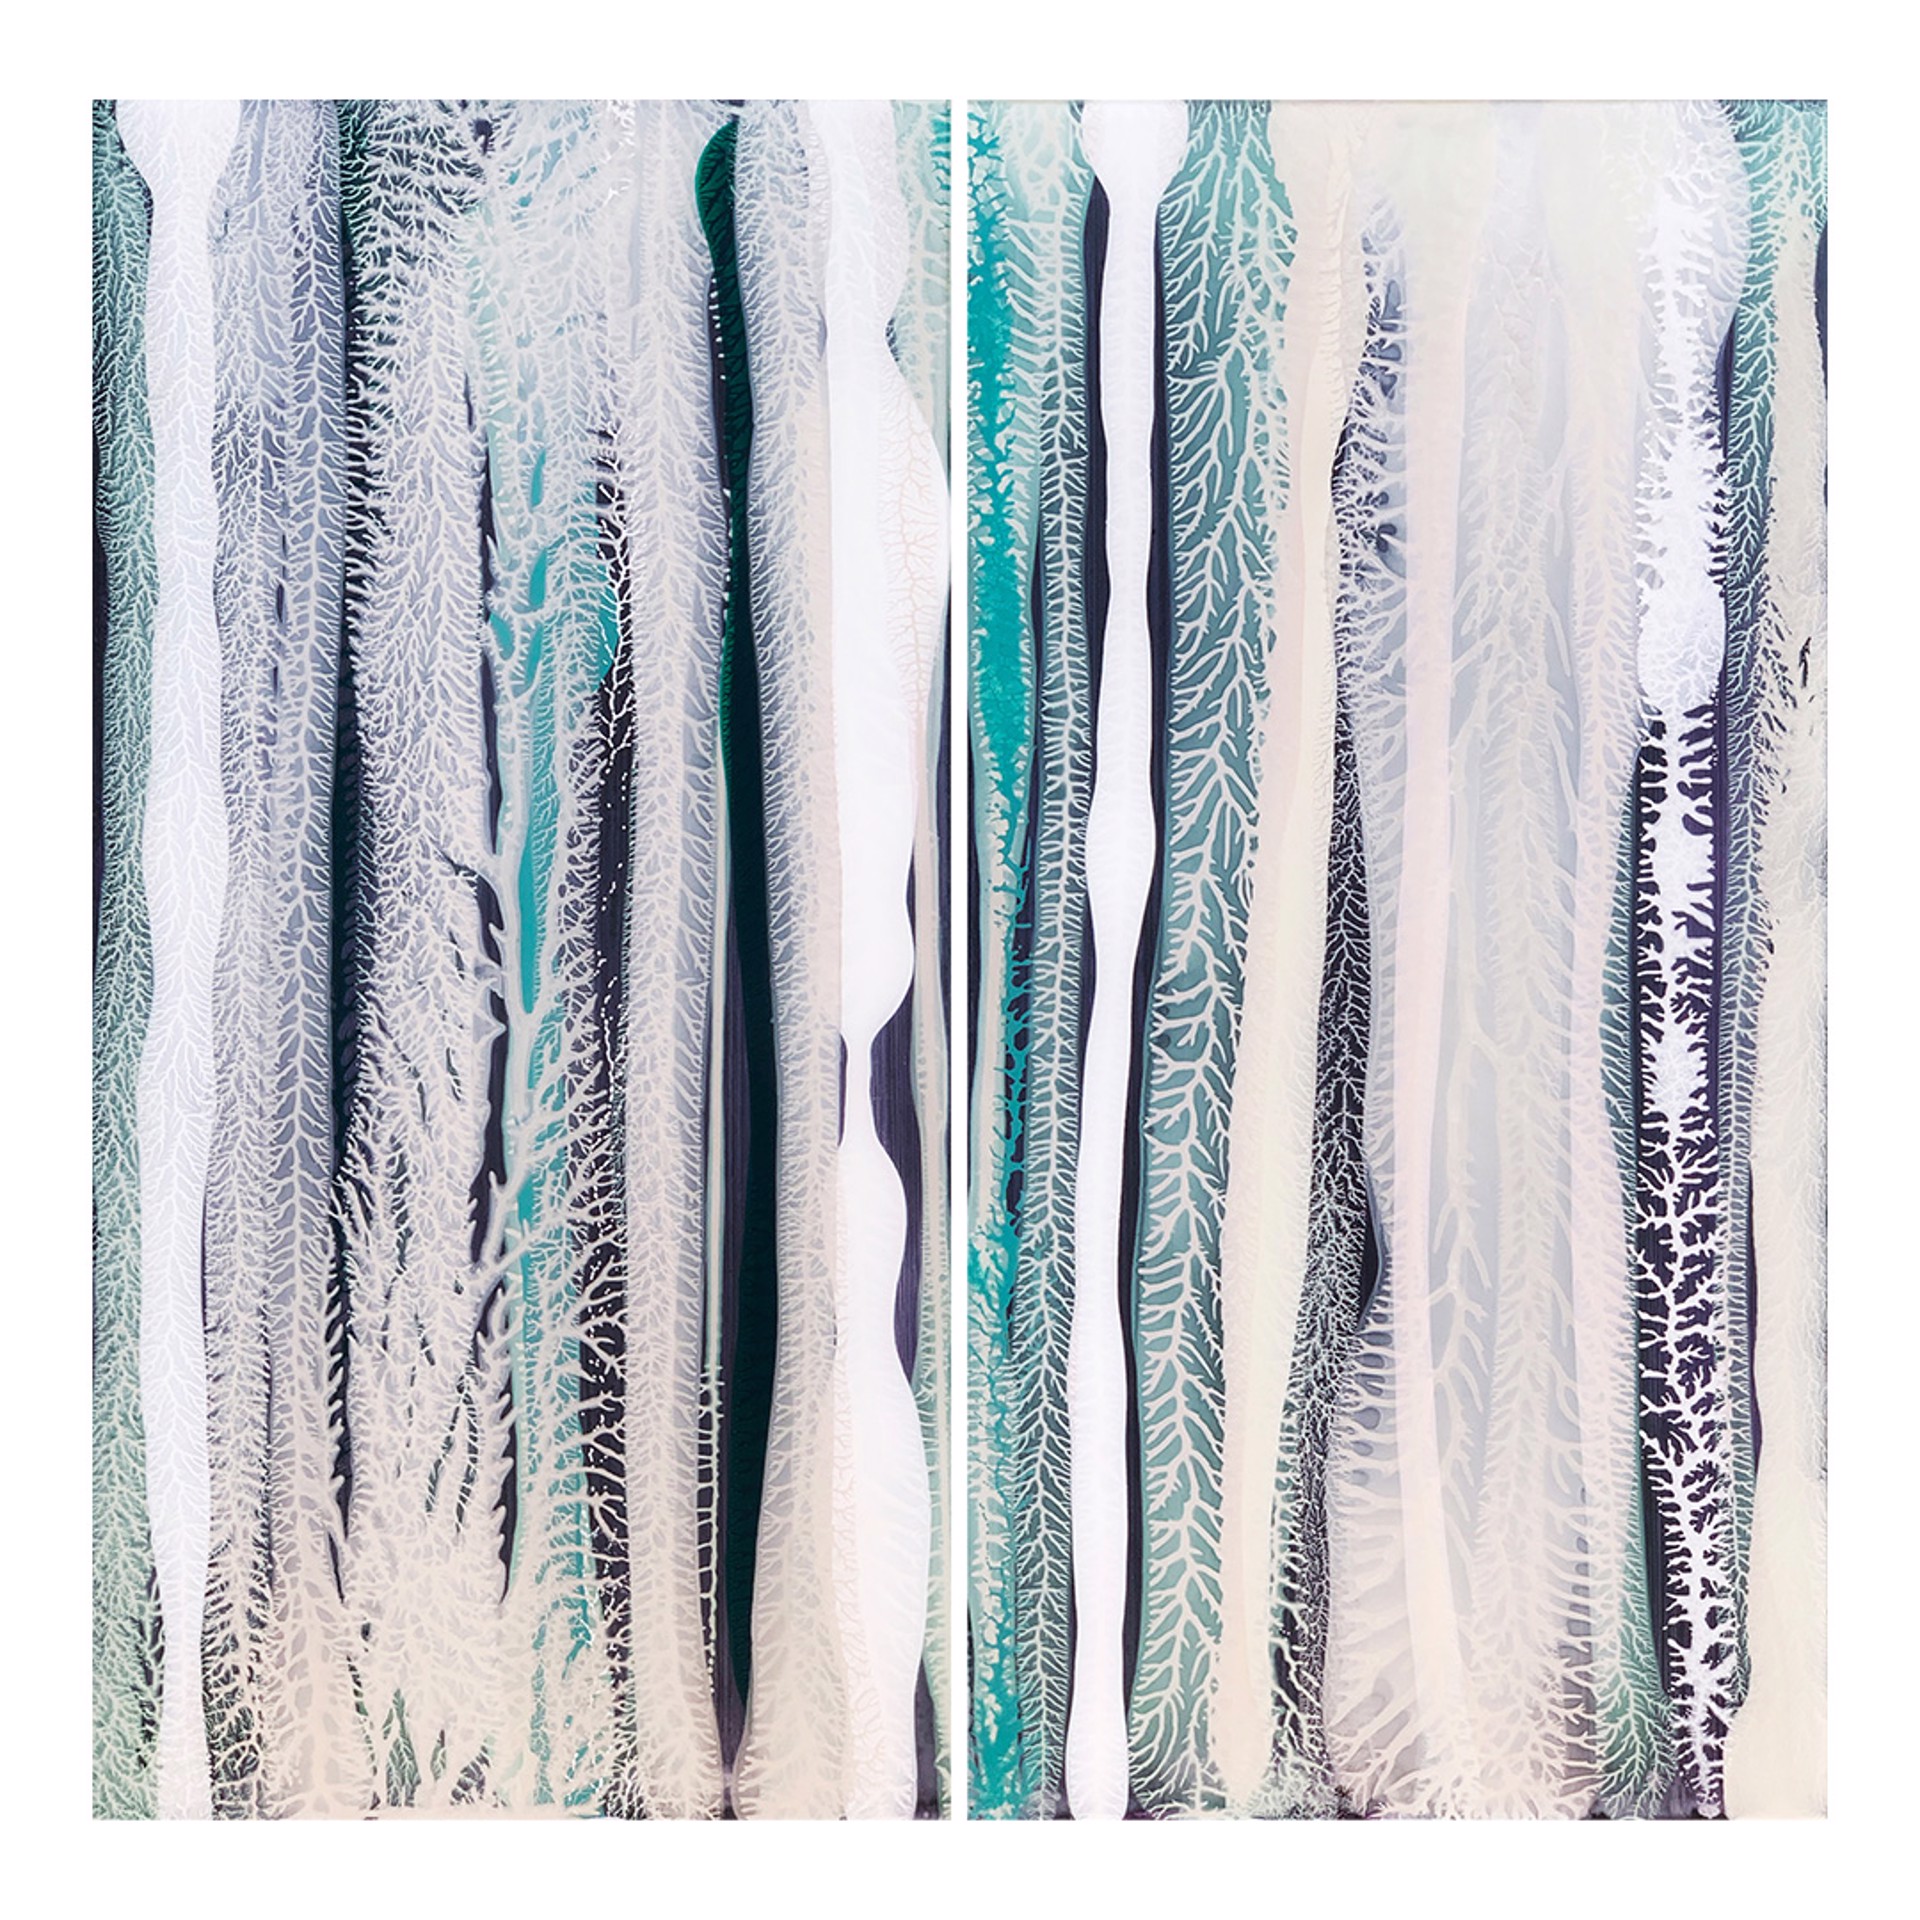 Naiads III (diptych) by Christopher Martin